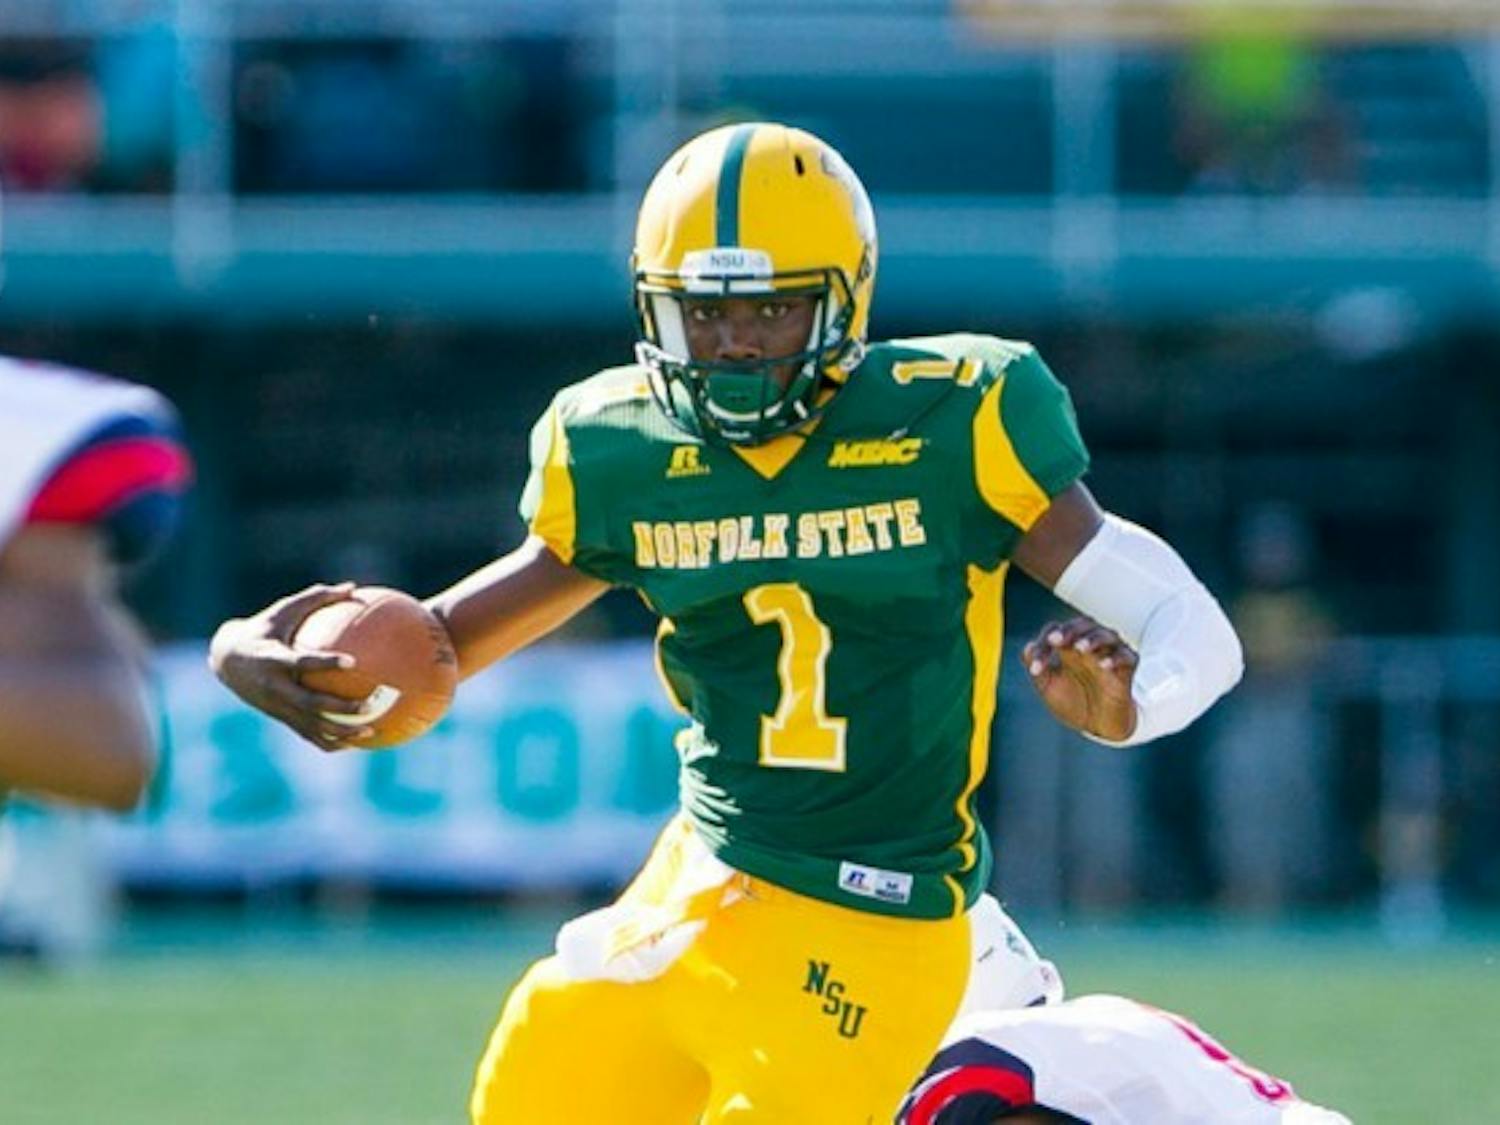 Norfolk State quarterback Terrance Ervin leads a Spartan offense that has scored just 20 points through three games this season. The Bulls host Norfolk State Saturday at 3:30 p.m. Courtesy of&nbsp;Mark W. Sutton/Mark&rsquo;s Digital Photography